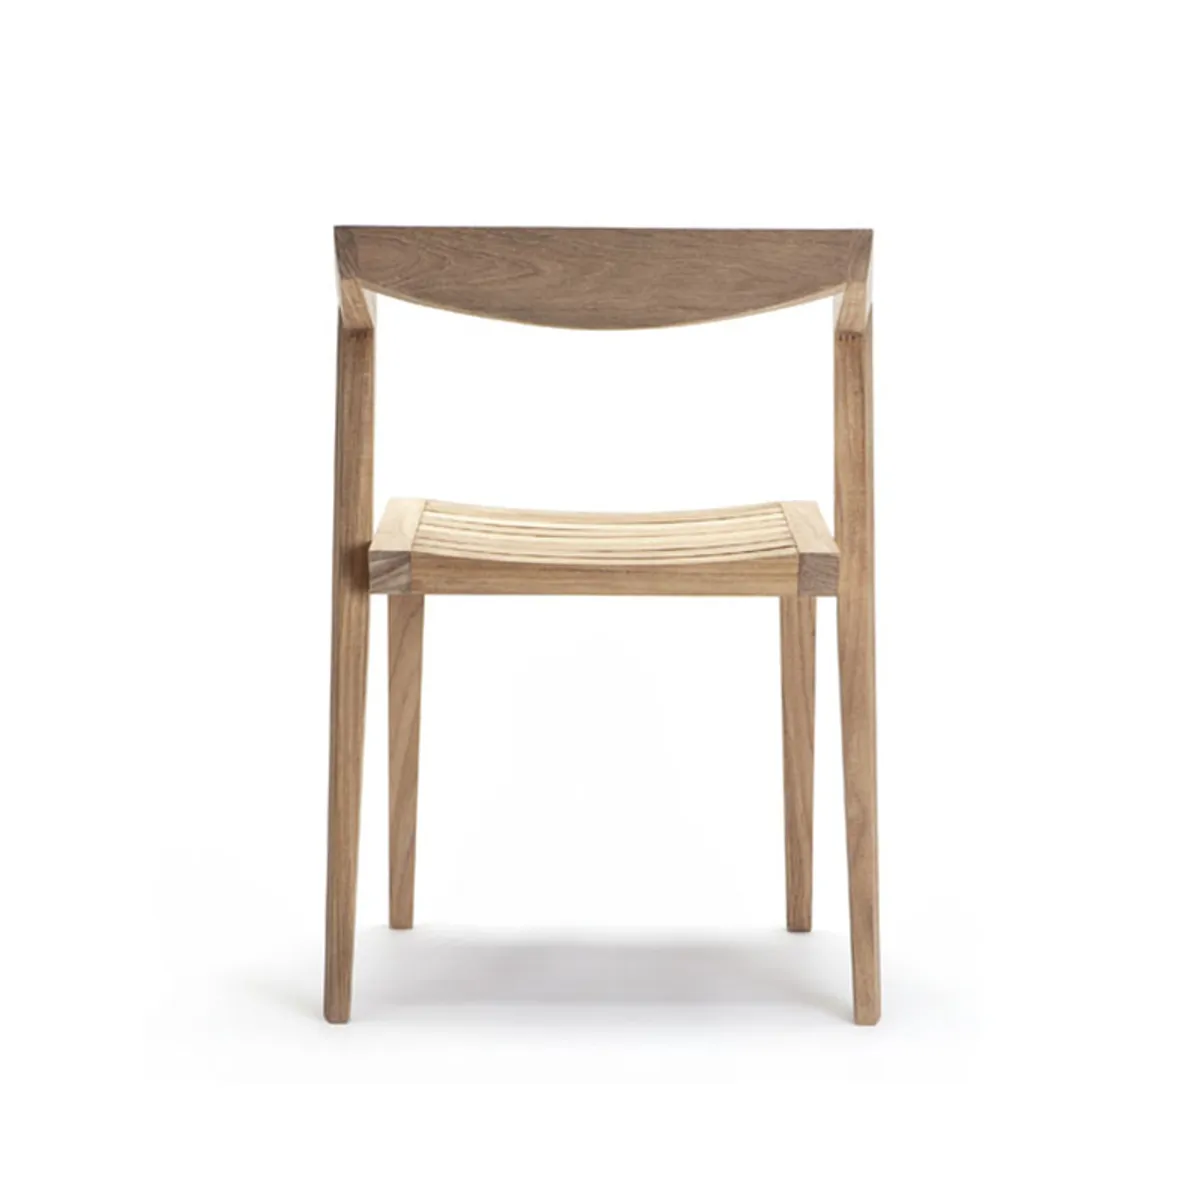 Borough Side Chair Stacking Outdoor Furniture In Teak Wood 078